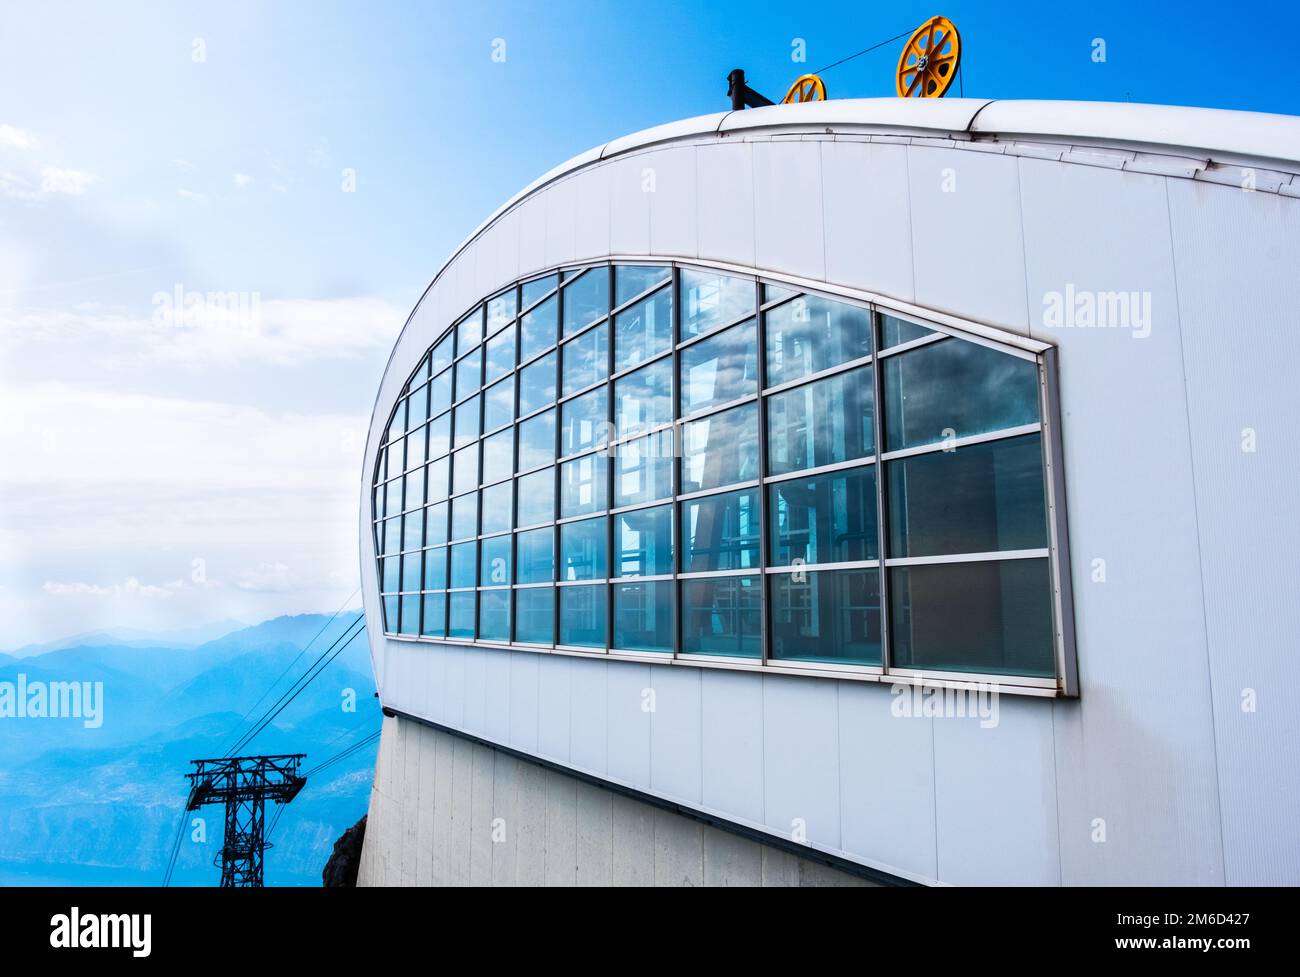 Modern aerial lift cable car skiing station arrival on high scenic panoramic blue sky mountain top Stock Photo